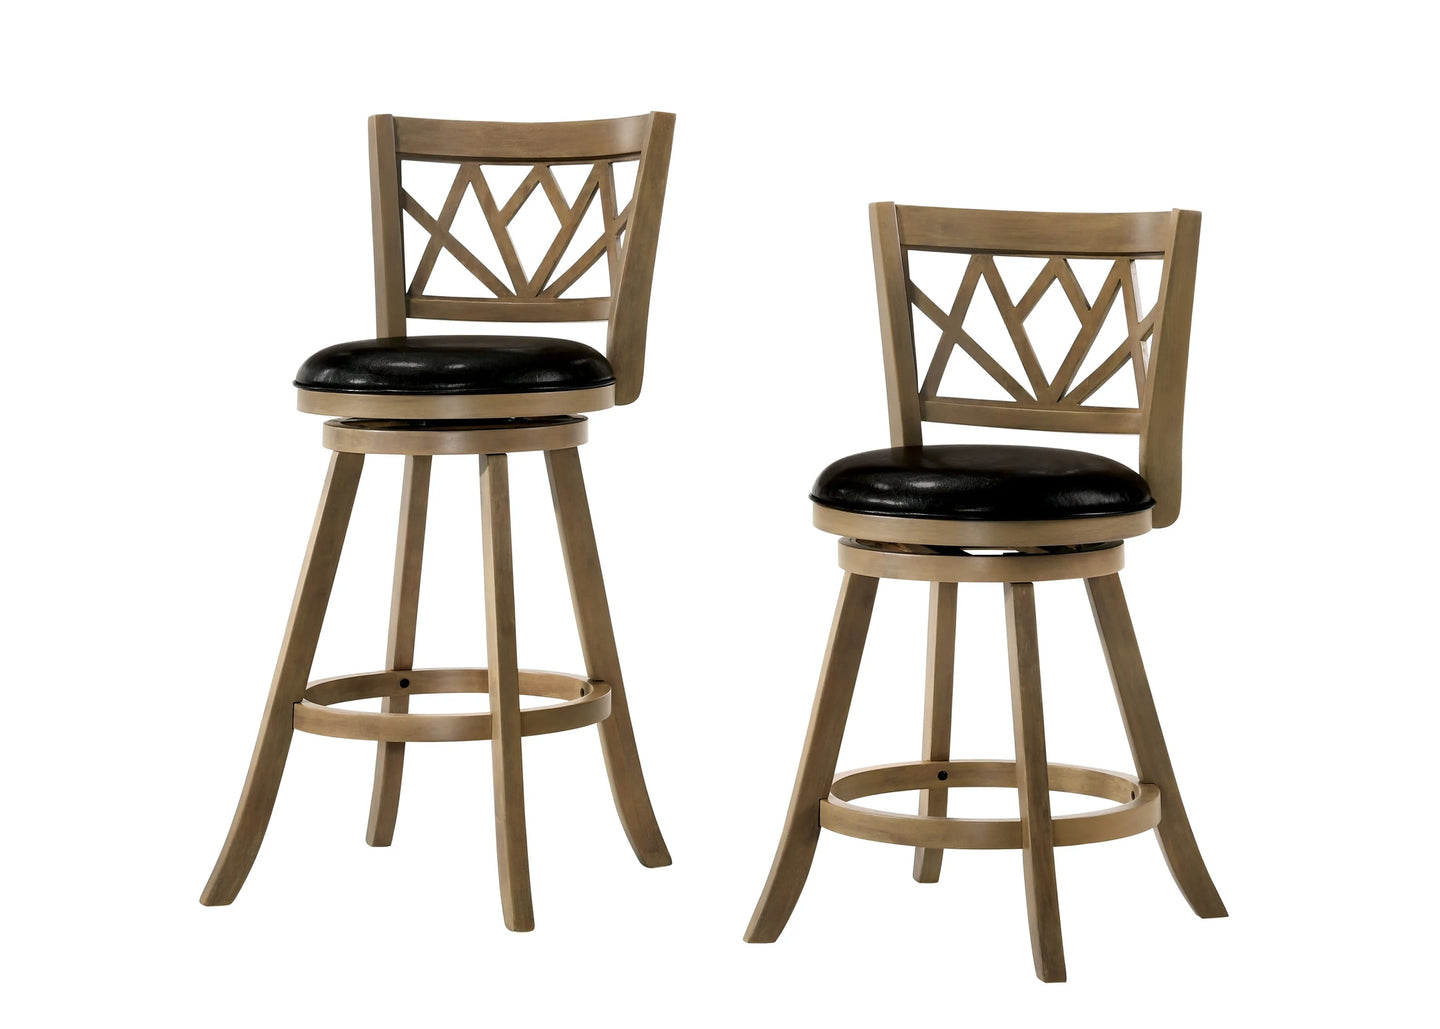 Furniture of America Alyssa Transitional Padded 24-Inch Bar Stool in Maple - IDF-BR6106A-24